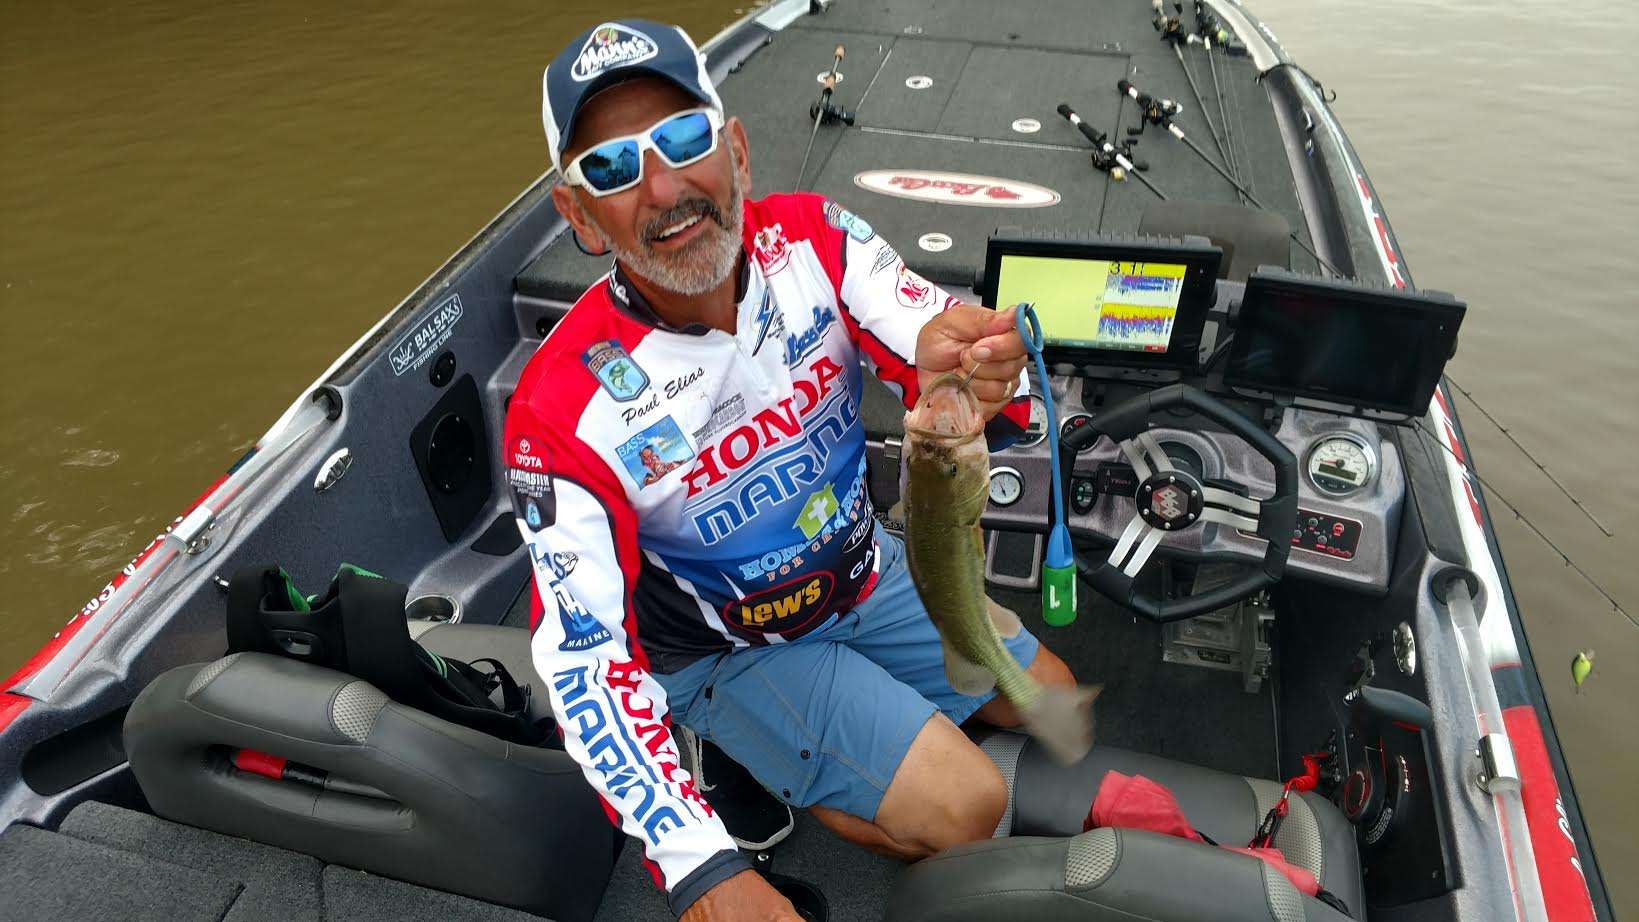 Paul Elias has a nice 2-pounder for his quick first fish on Day 3.